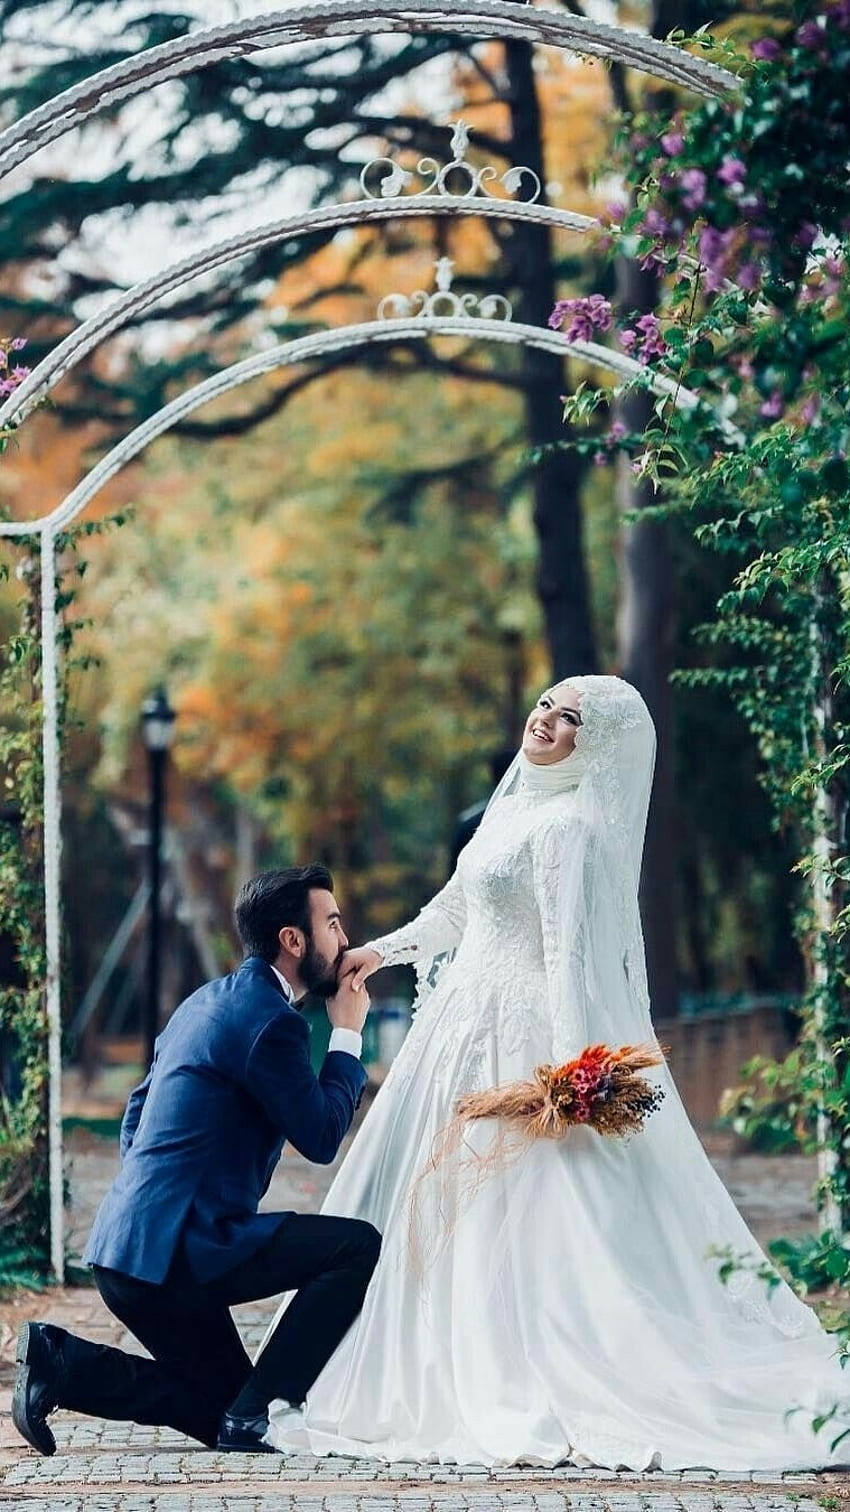 61,000+ Muslim Couple Pictures